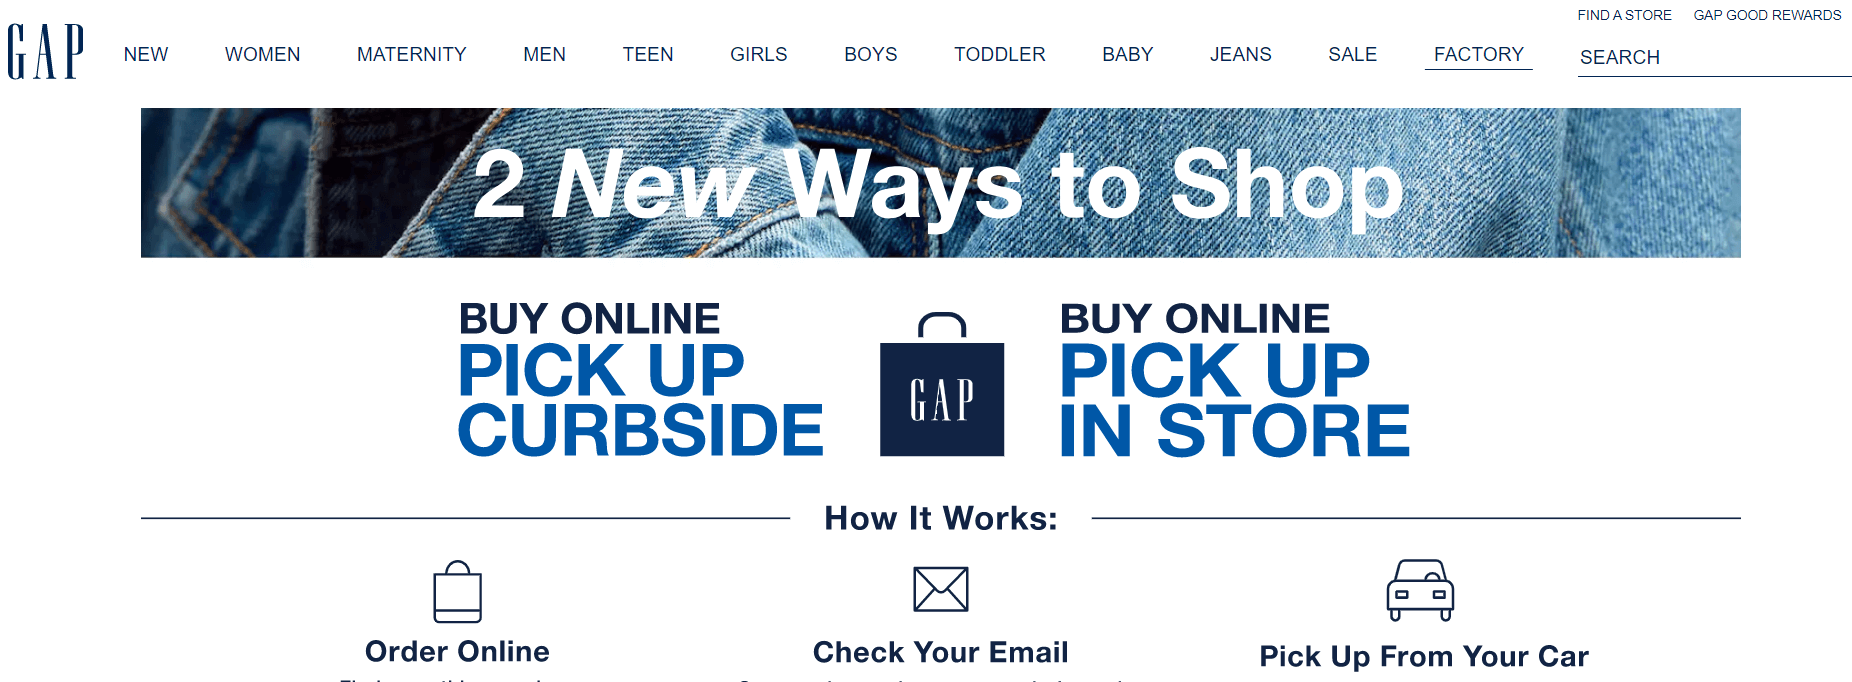 An example of omnichannel marketing from Gap. 